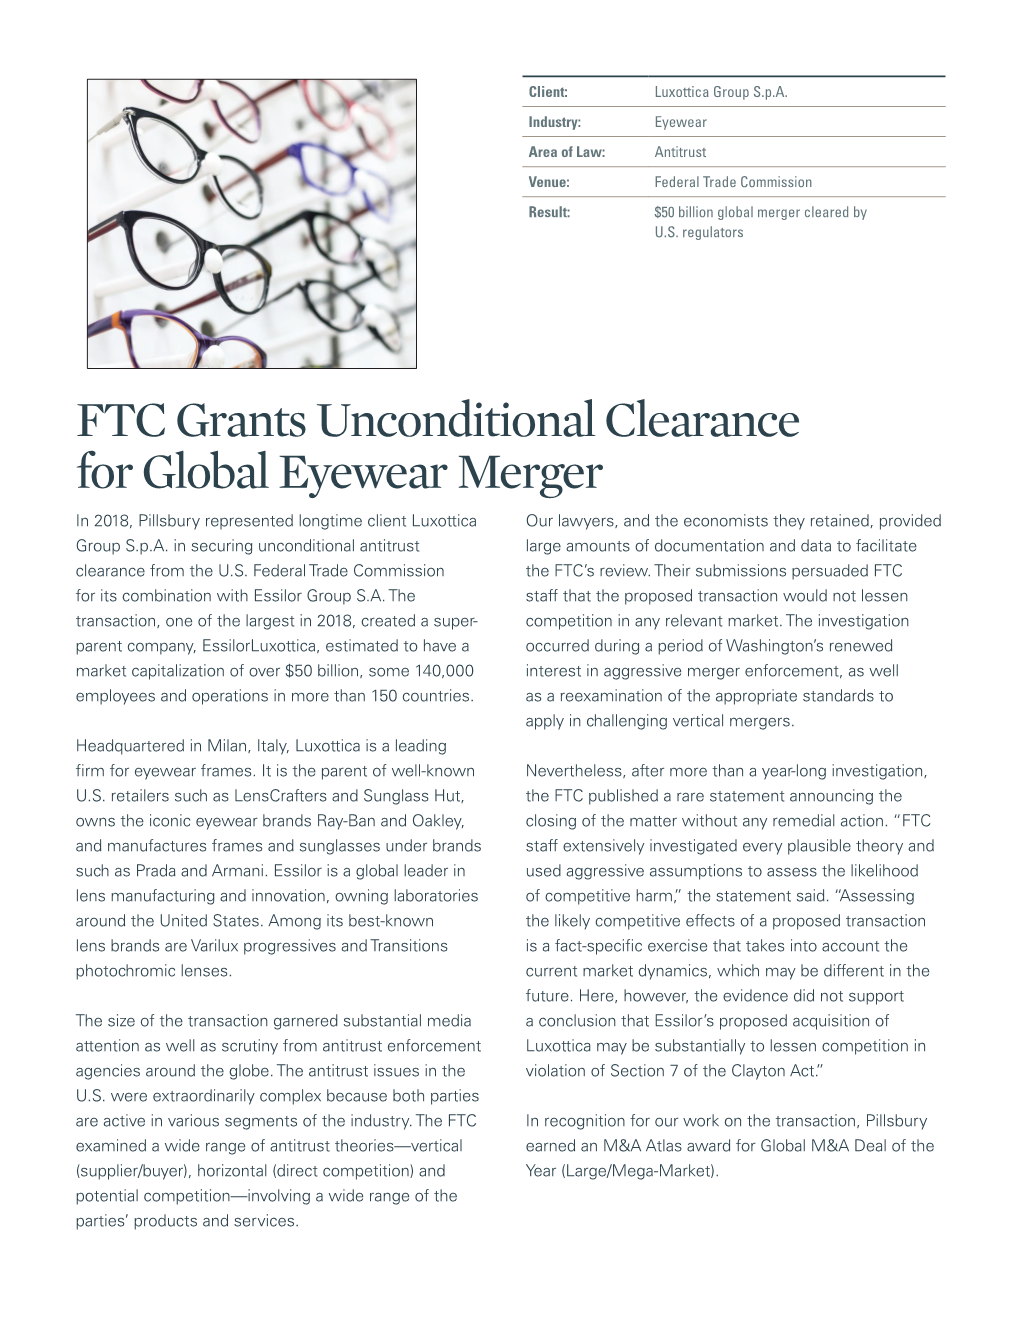 FTC Grants Unconditional Clearance for Global Eyewear Merger